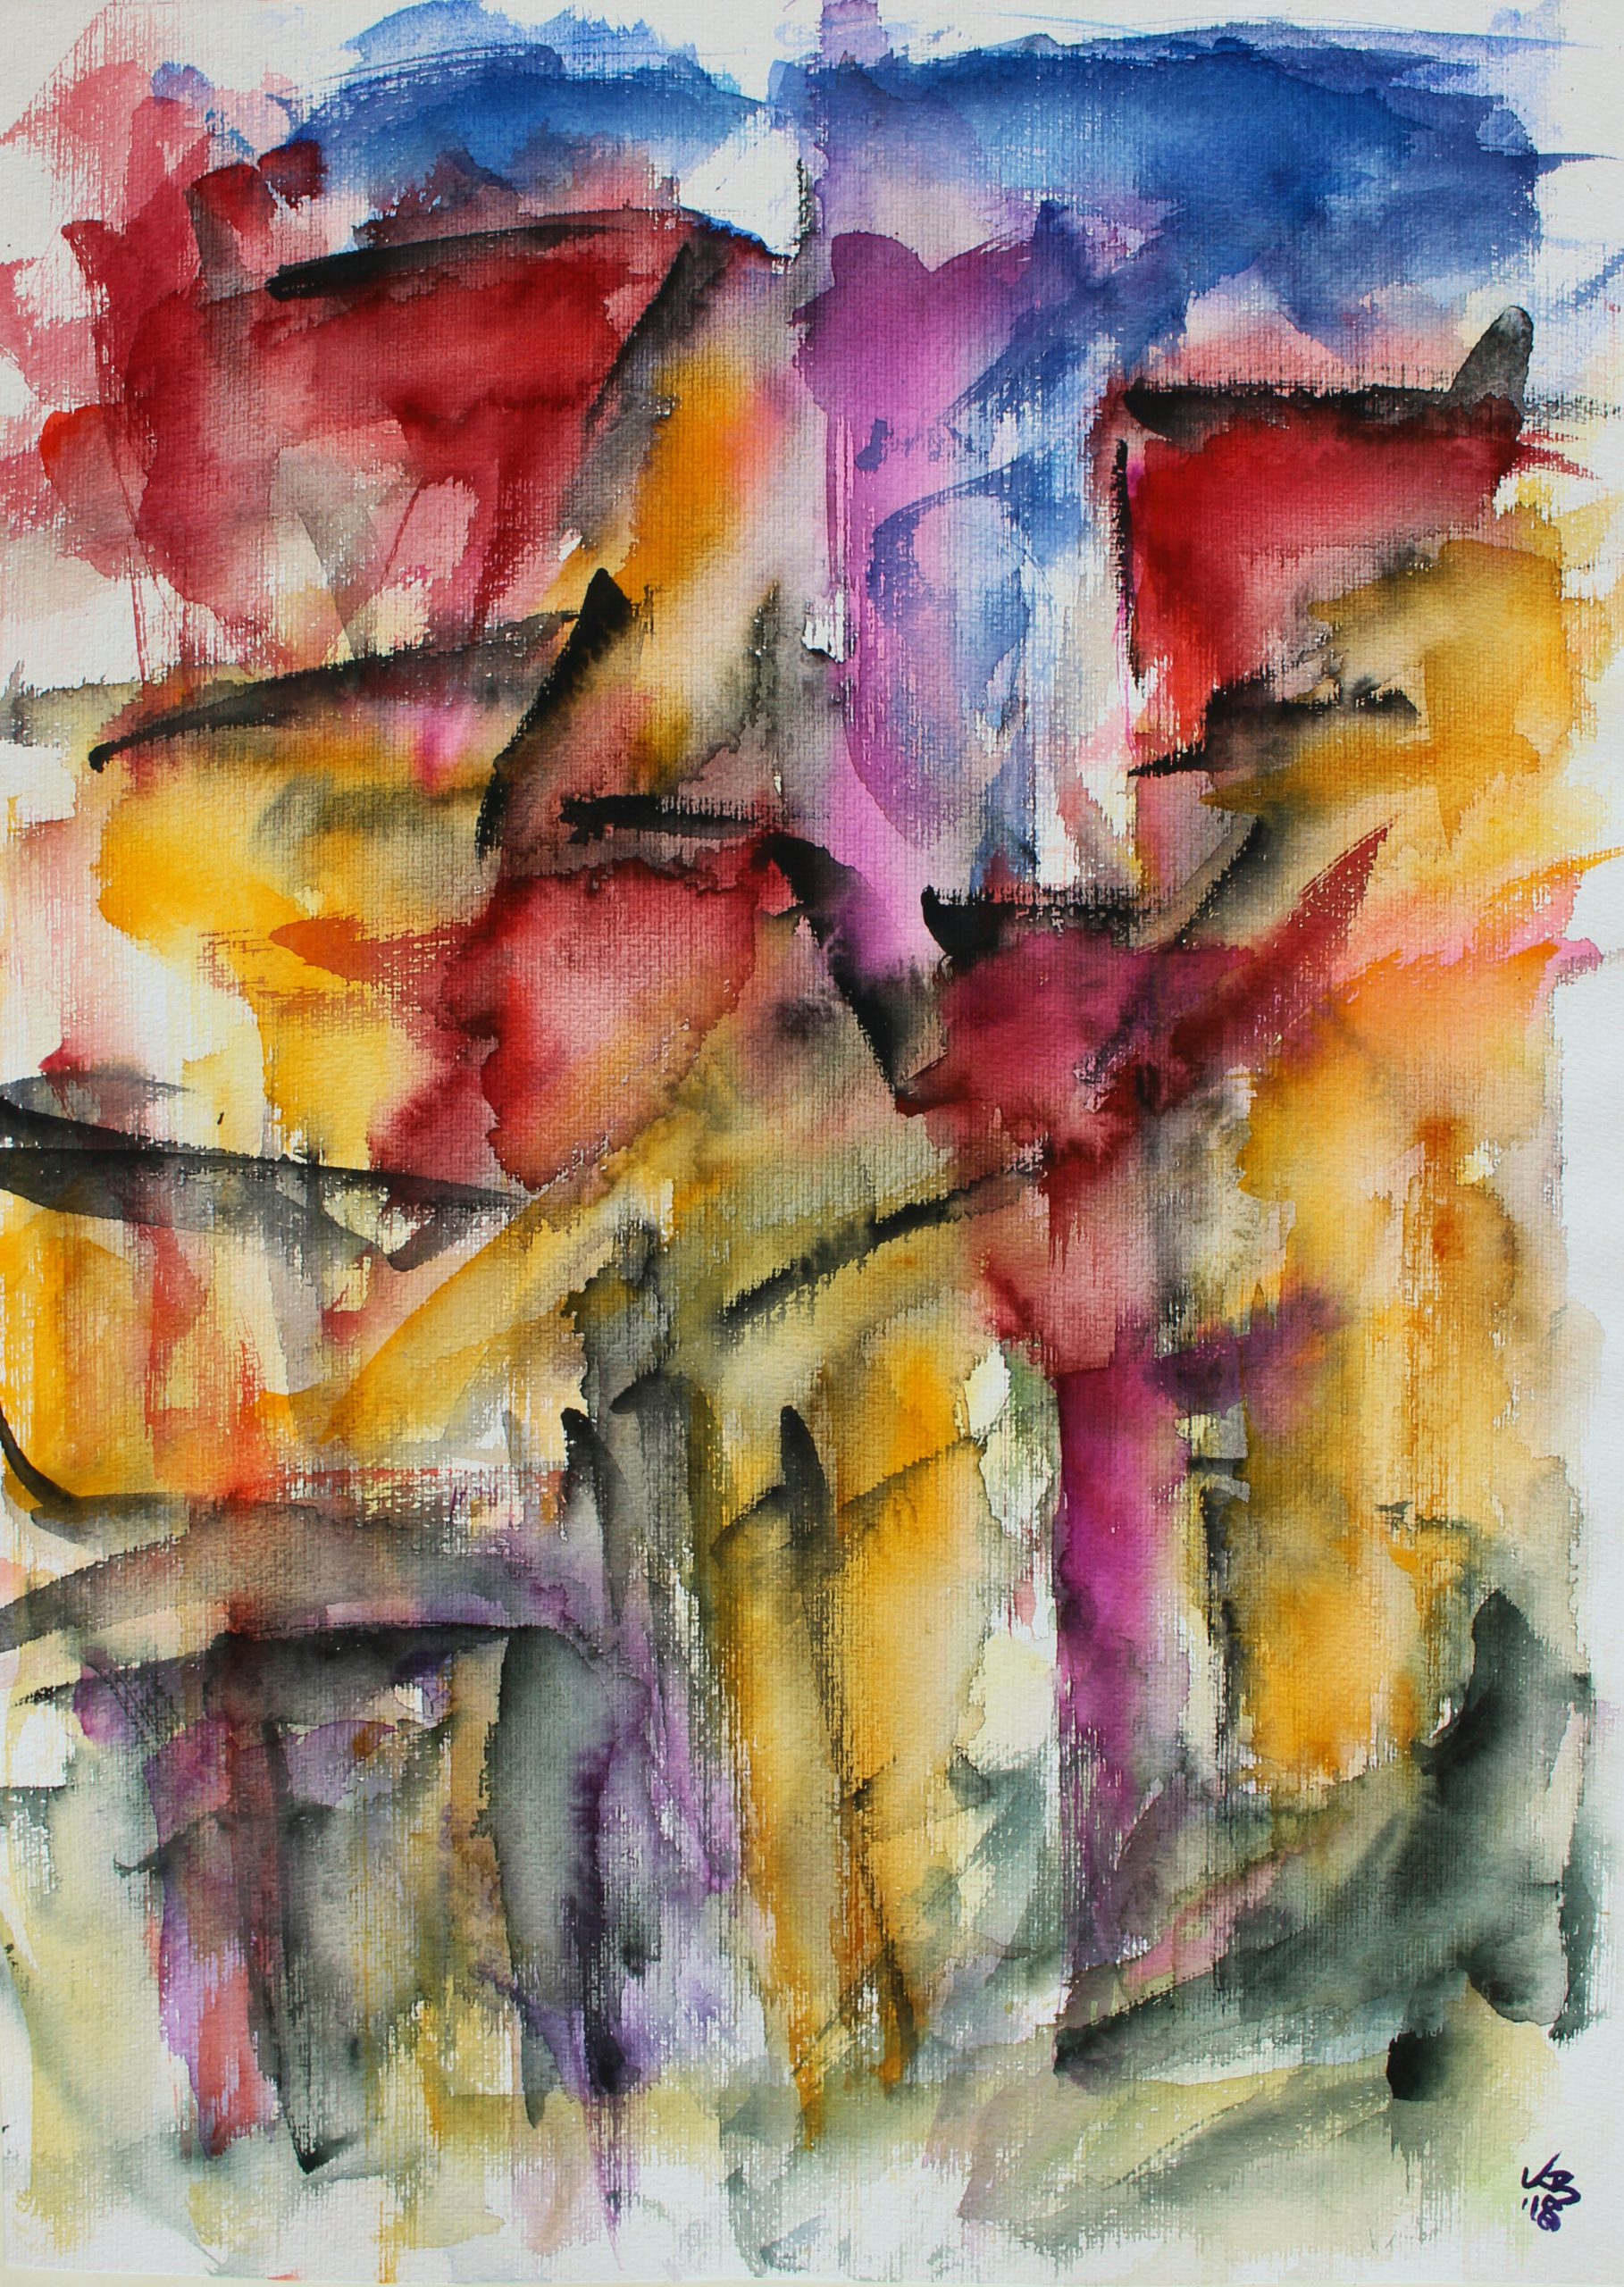 changing places II, Homberg, Westheimer Straße, Watercolour 50 x 70 cm, © 2018 by Klaus Bölling